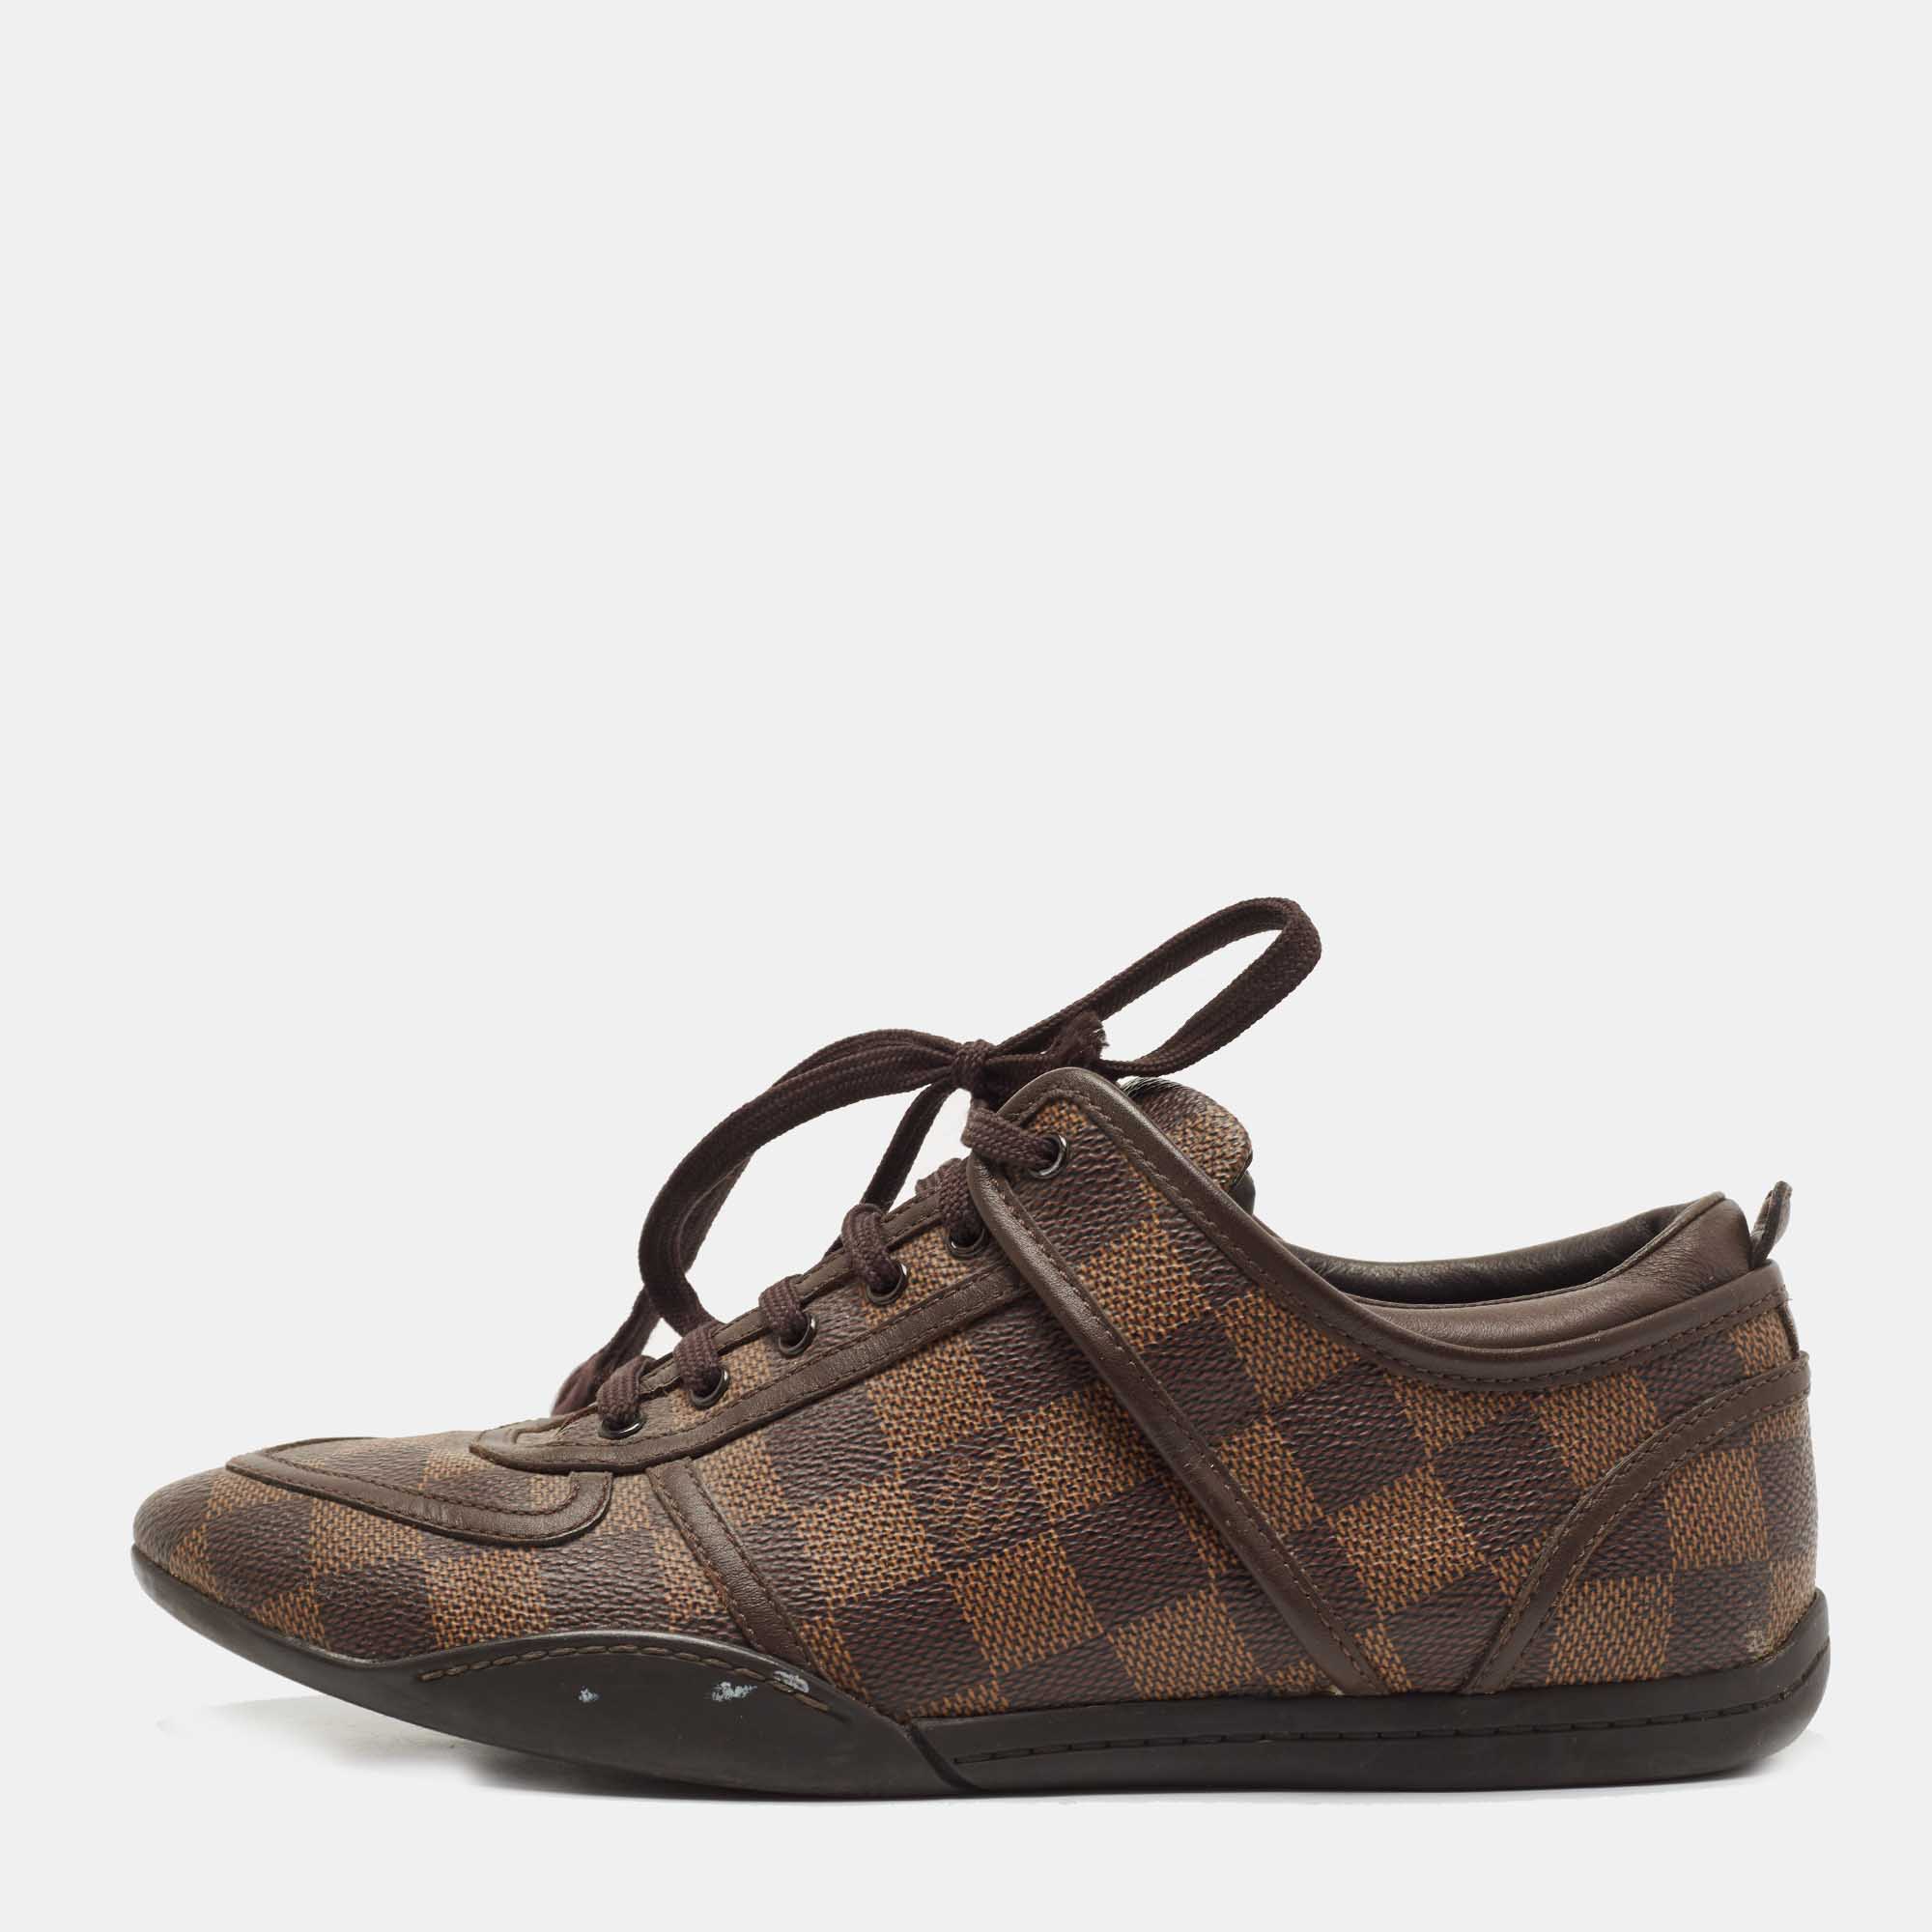 Louis Vuitton Brown Damier Ebene Canvas And Leather Low Top Sneakers Size 36.5